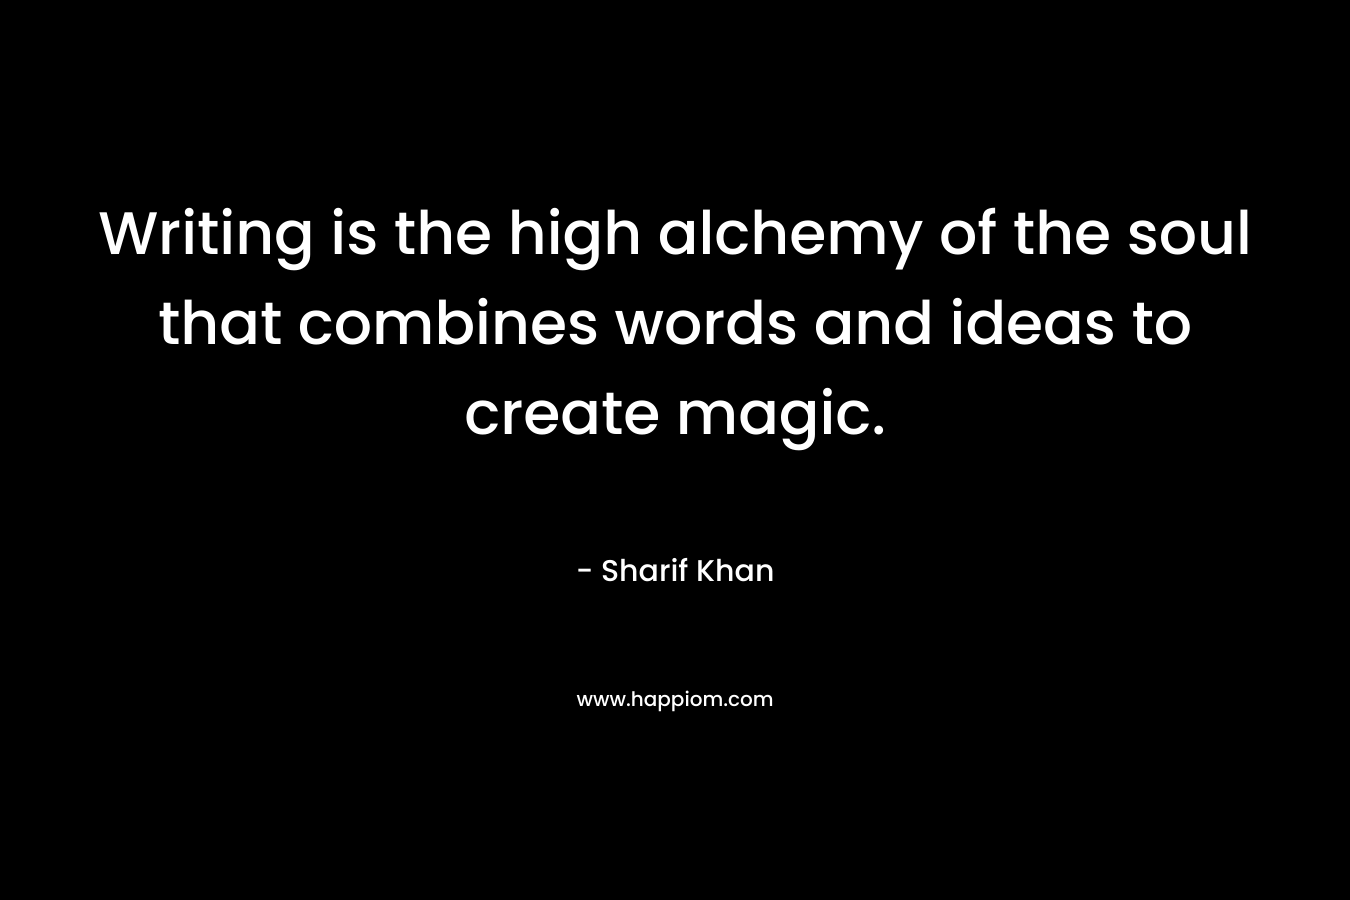 Writing is the high alchemy of the soul that combines words and ideas to create magic.